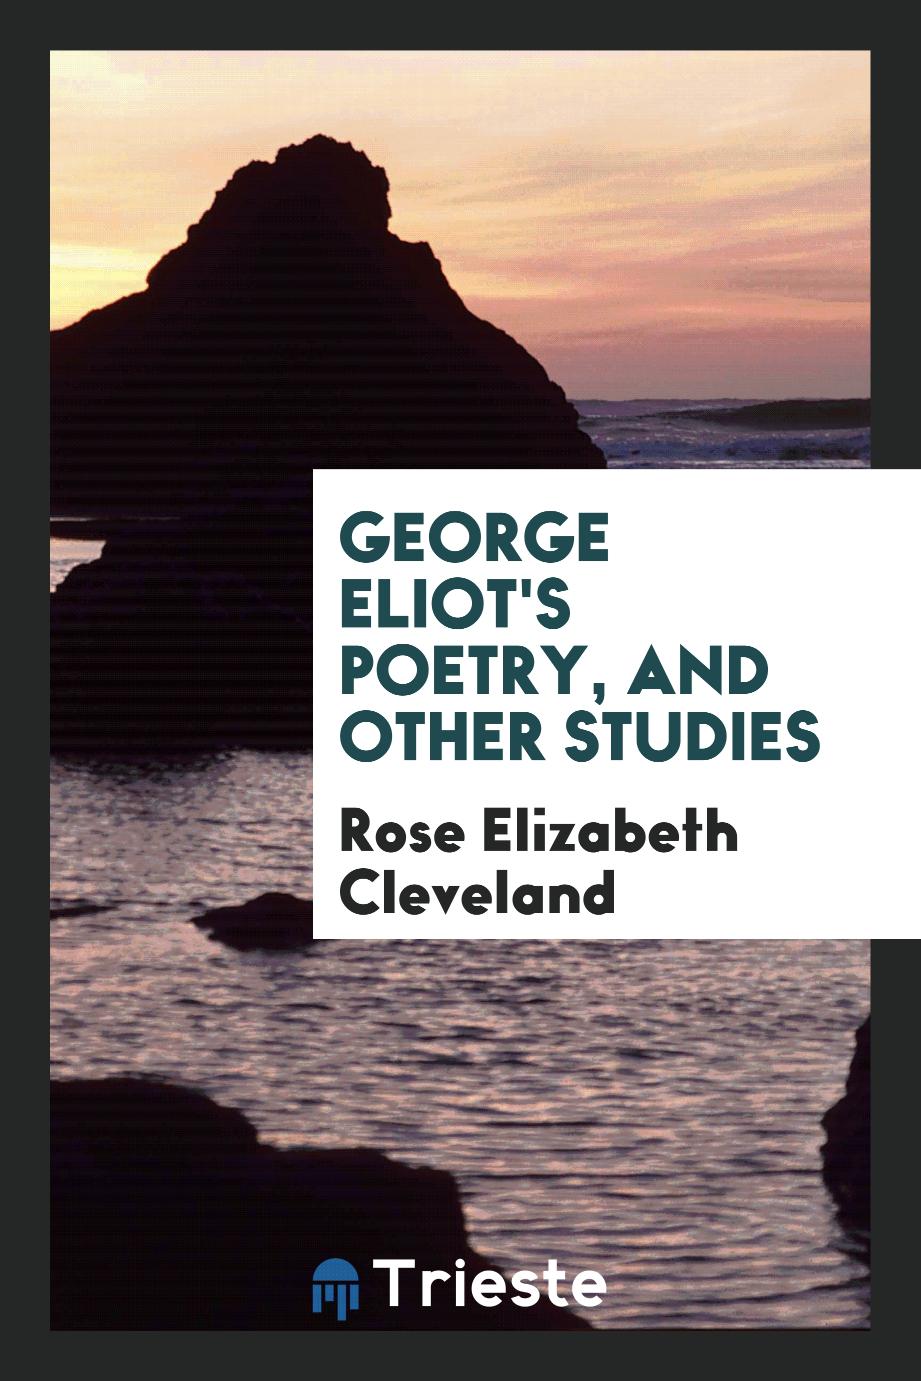 George Eliot's poetry, and other studies